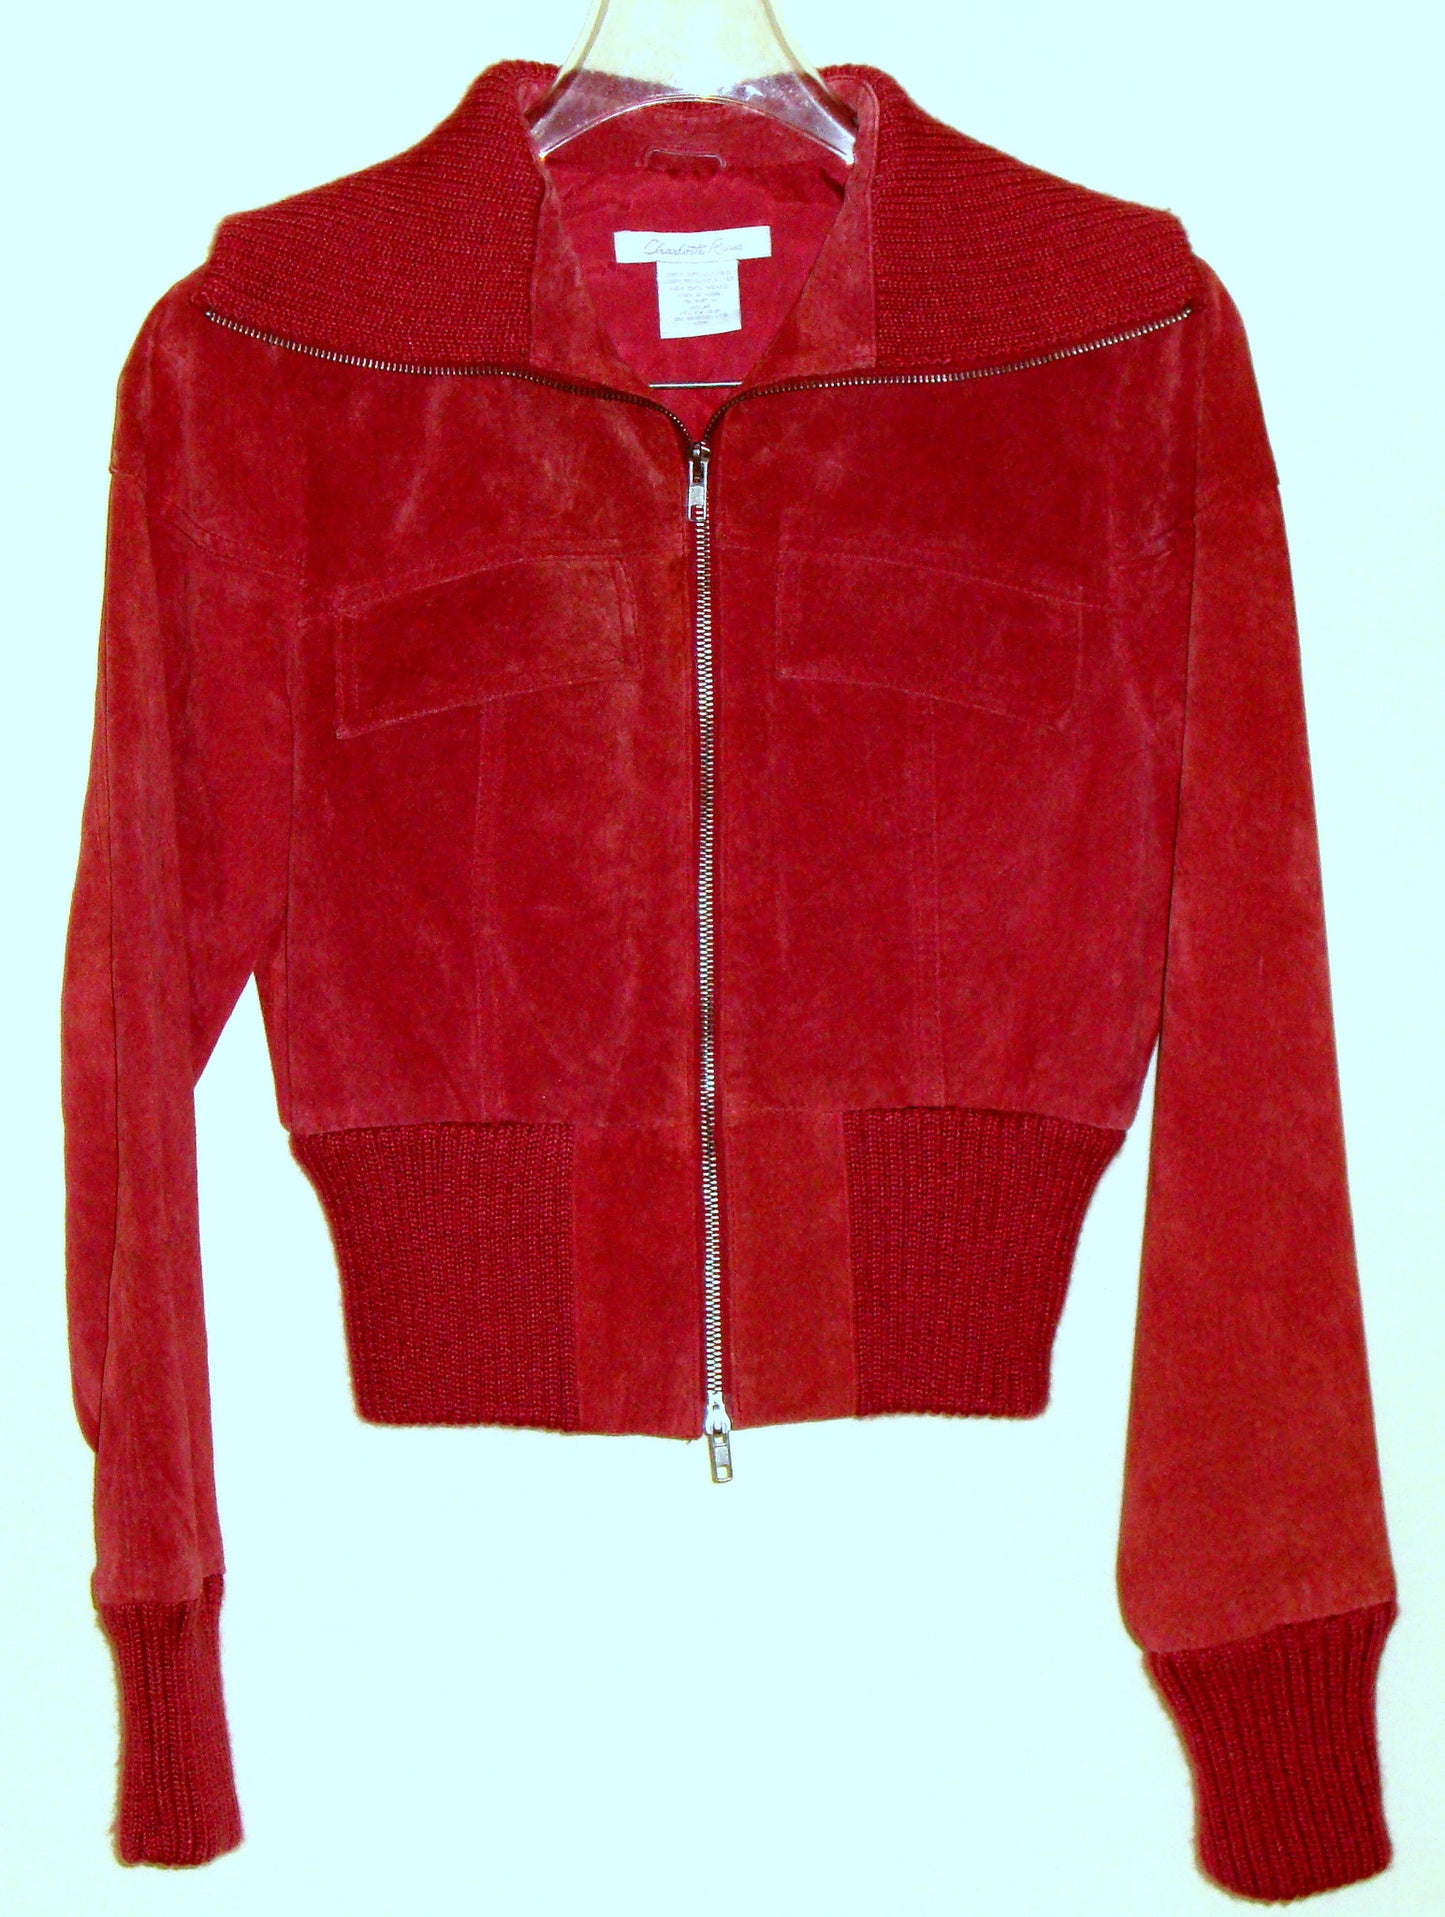 Red Suede Leather Zip Front Jacket Knit Collar Cuffs